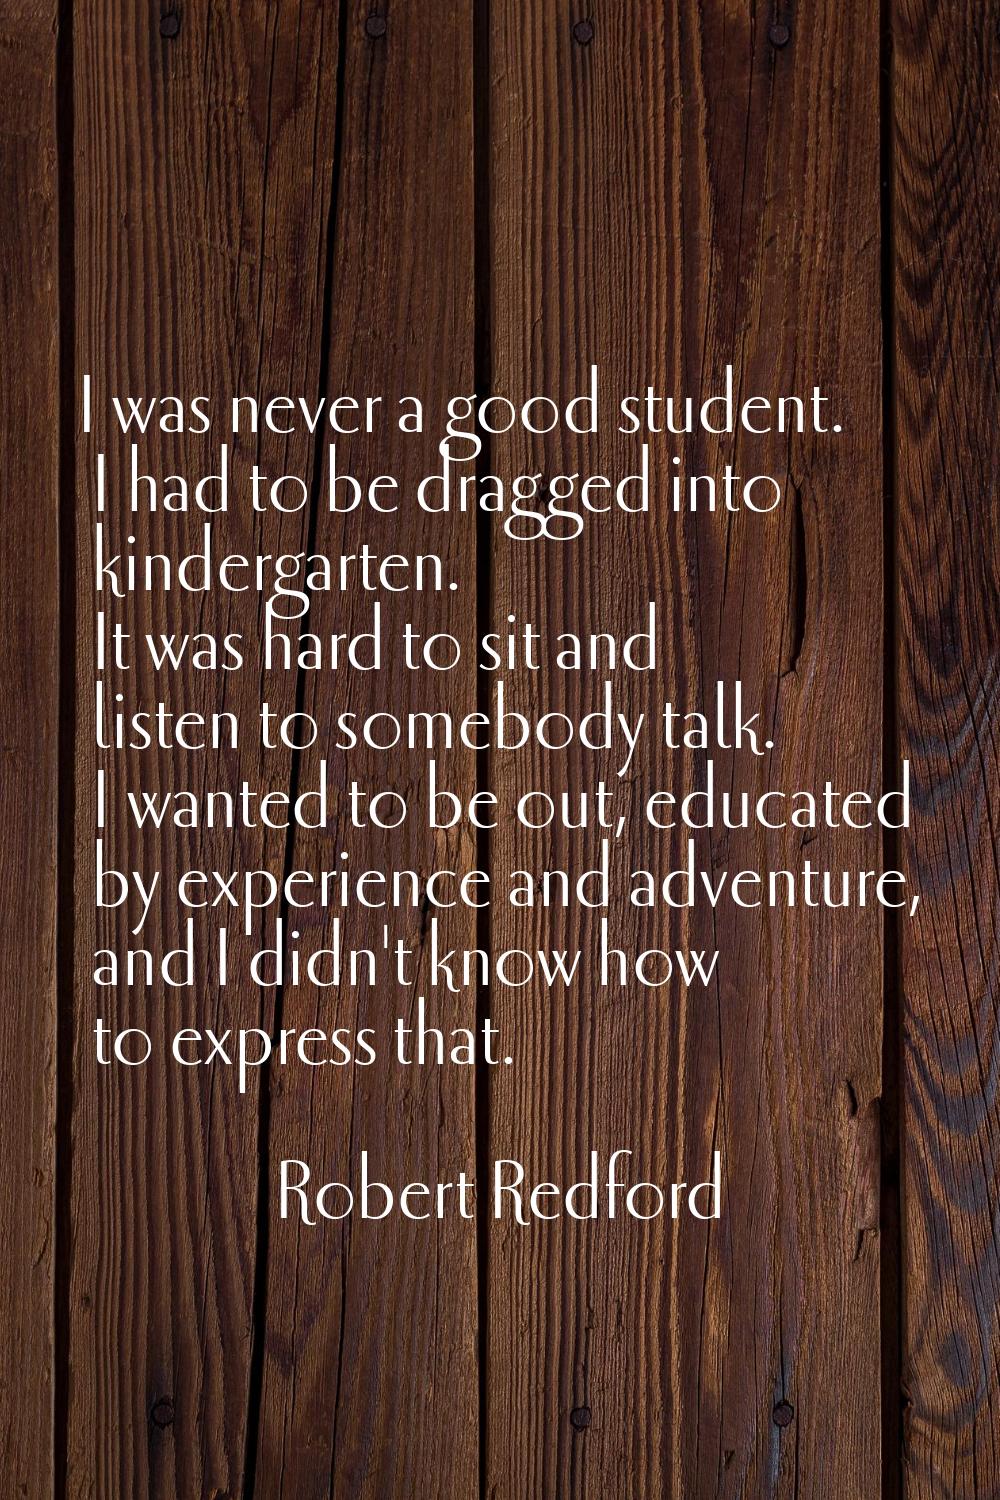 I was never a good student. I had to be dragged into kindergarten. It was hard to sit and listen to